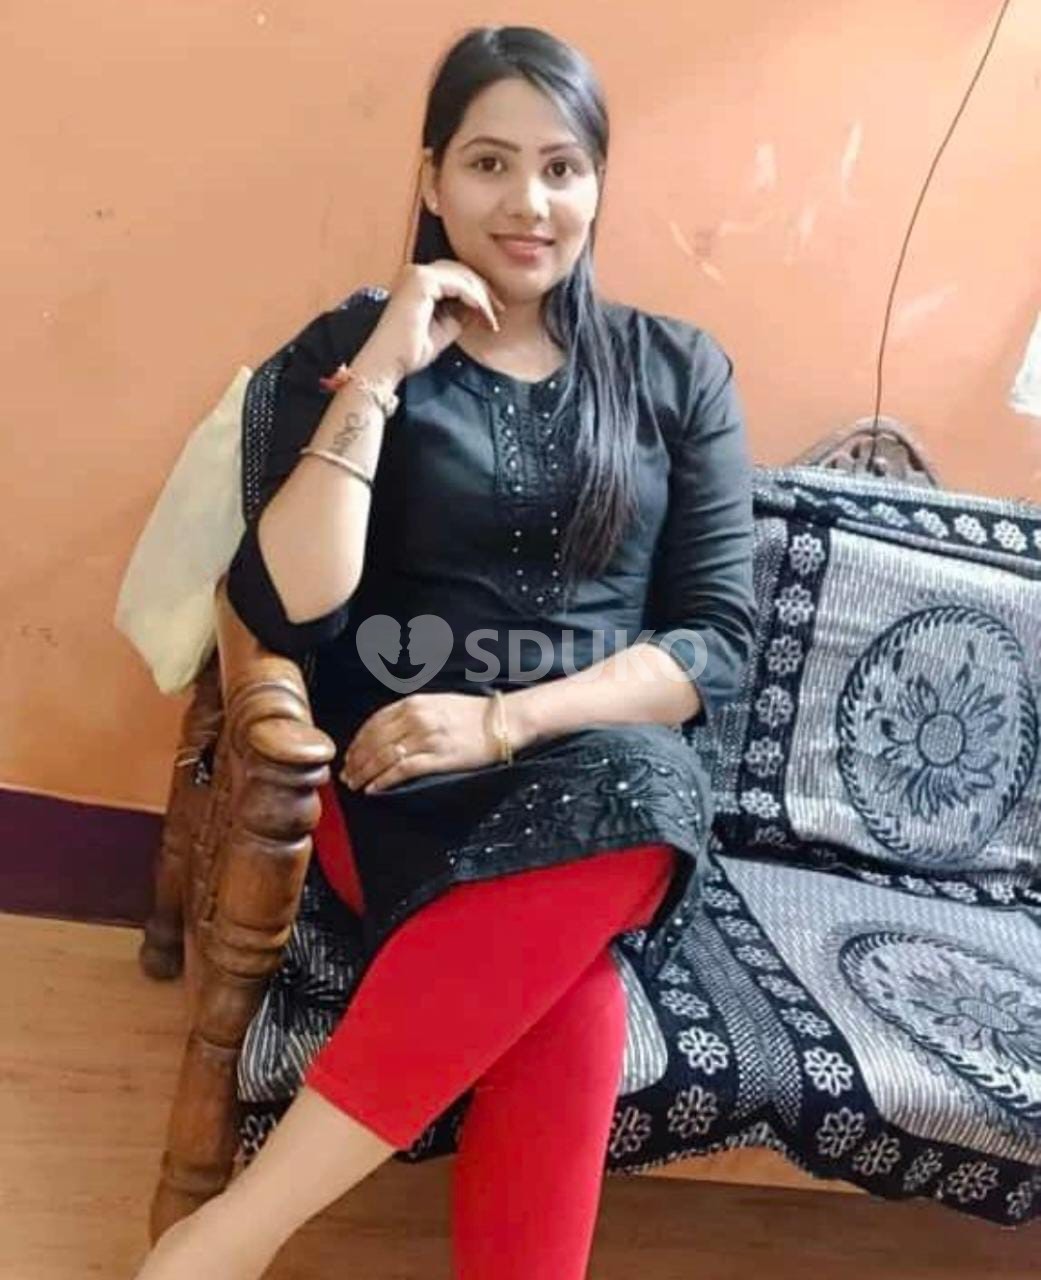 Genuine MOHALI Panchkula enjoy NOW' VIP TODAY LOW PRICE/TOP INDEPENDENCE VIP (ESCORT) BEST HIGH PROFILE GIRL'S AVAILABL